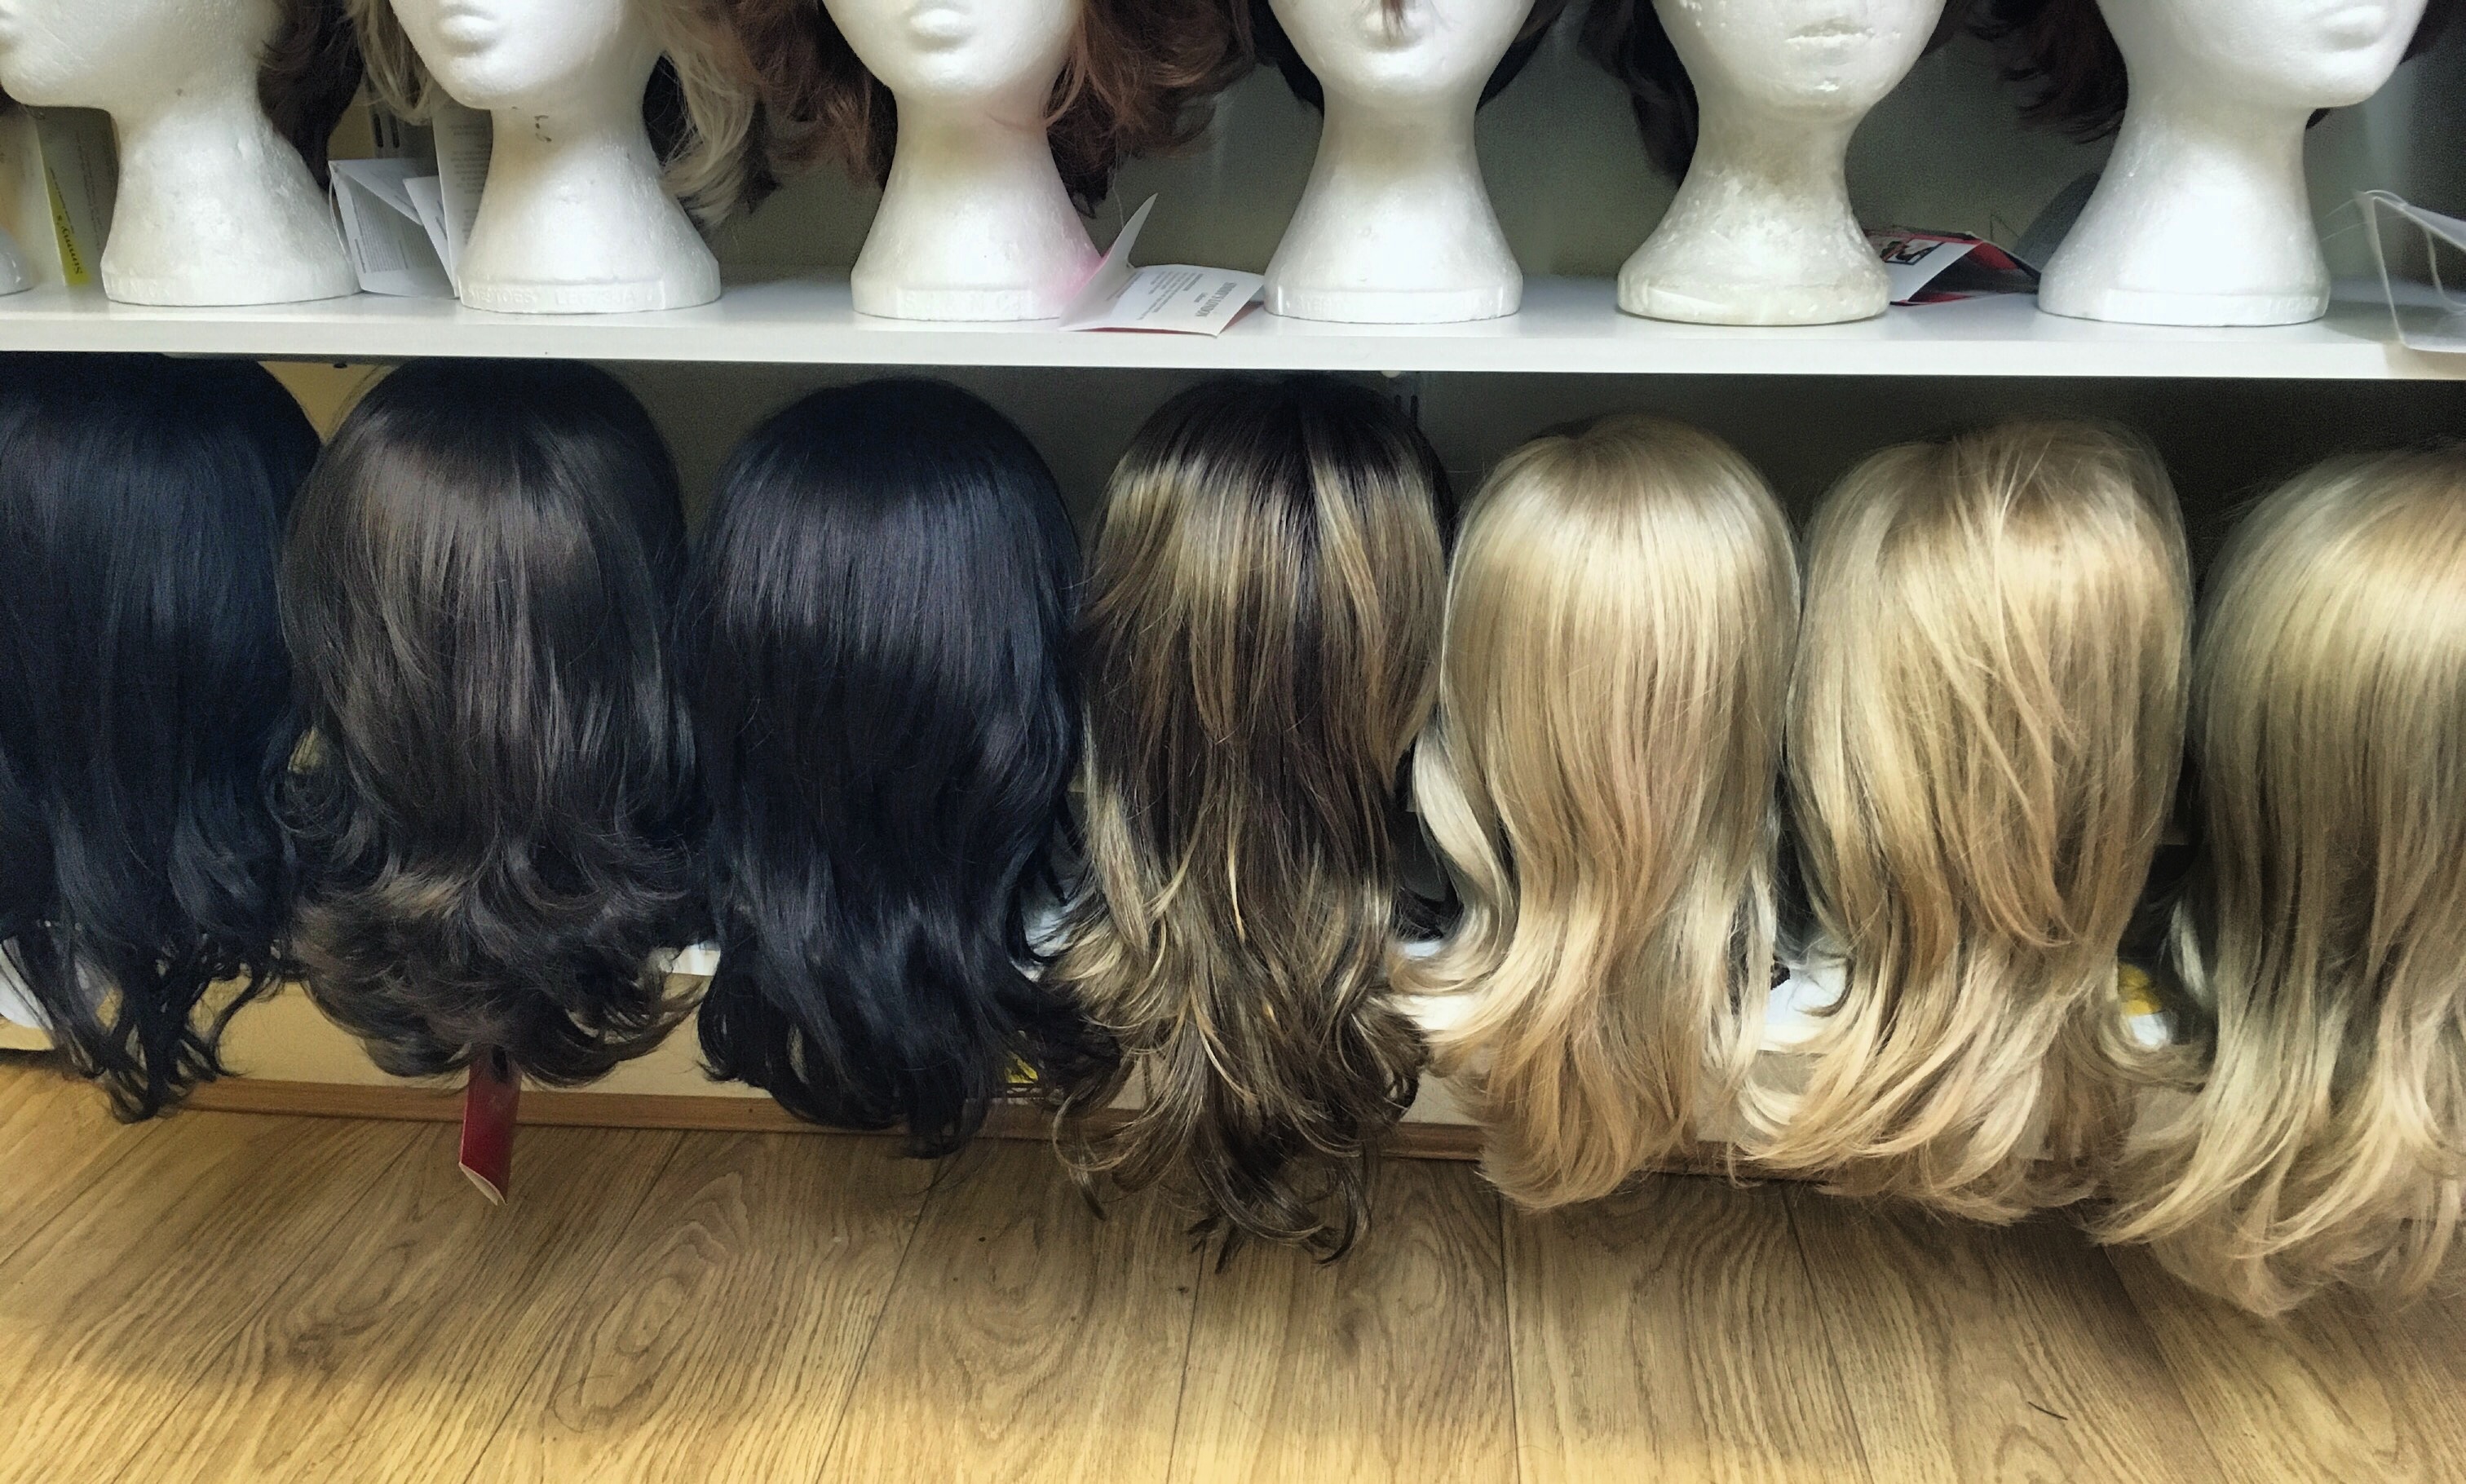 A Professional Wig Maker Is All You Need. True Or Not?